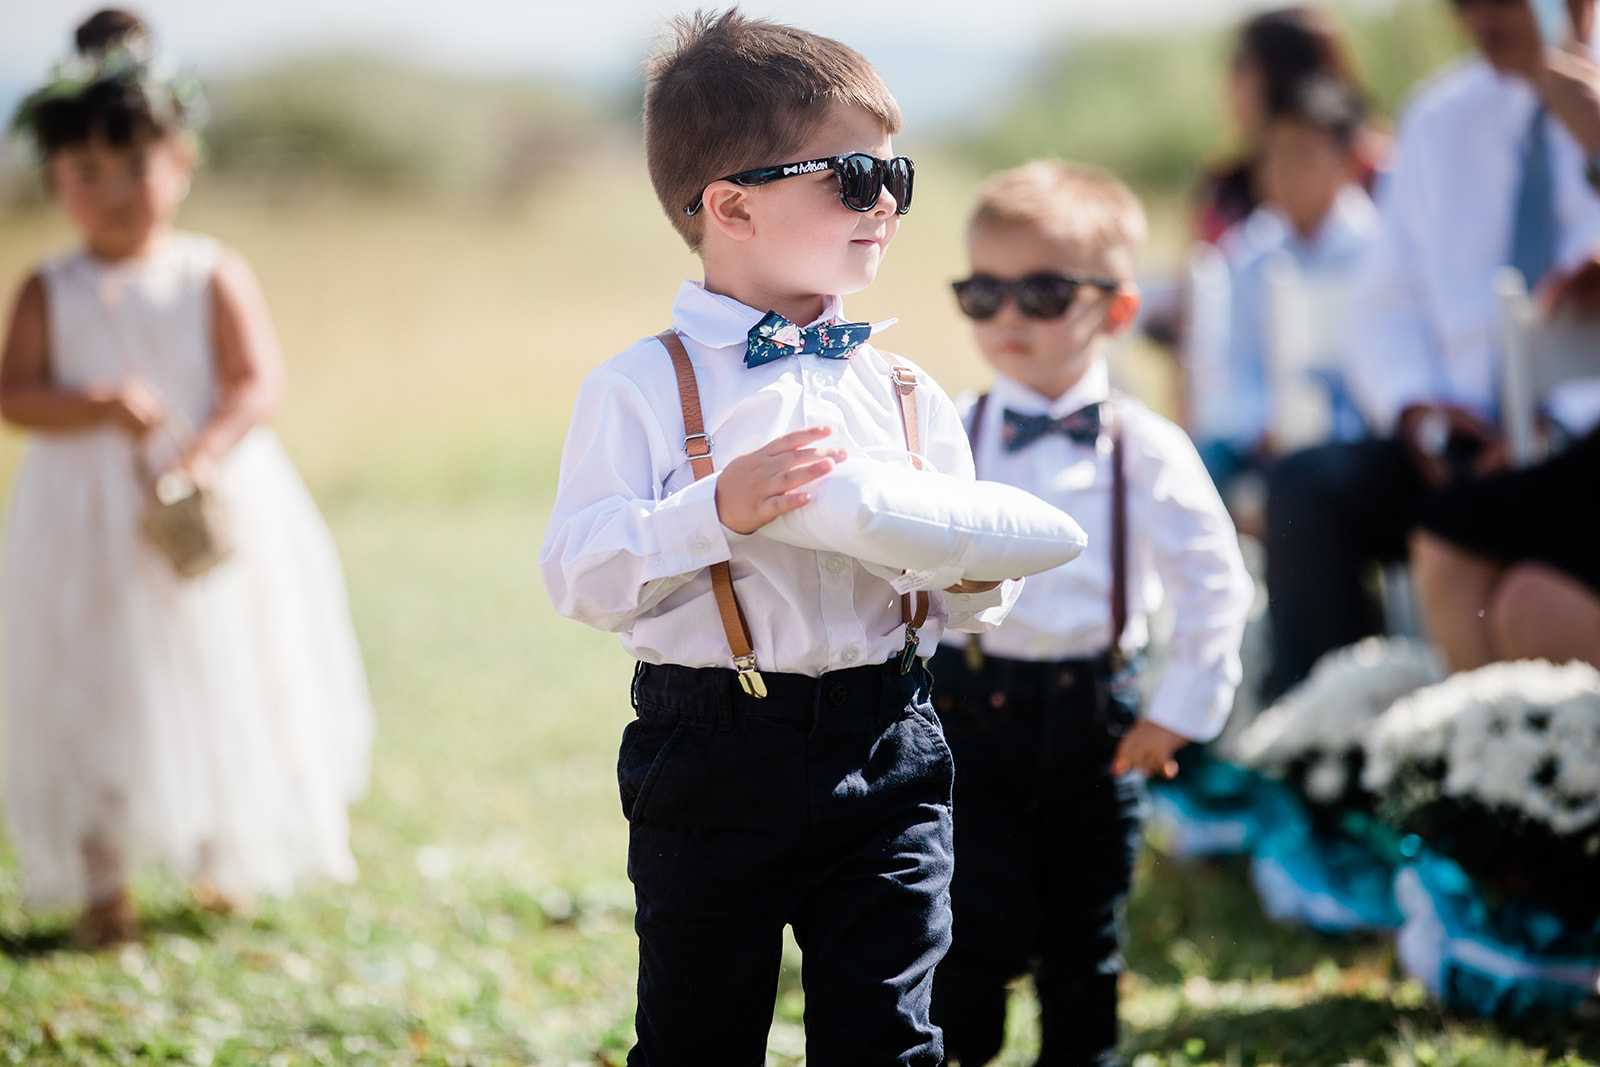 ring bearer and flower girl walks down aisle in outdoor Colorado mountain ranch wedding